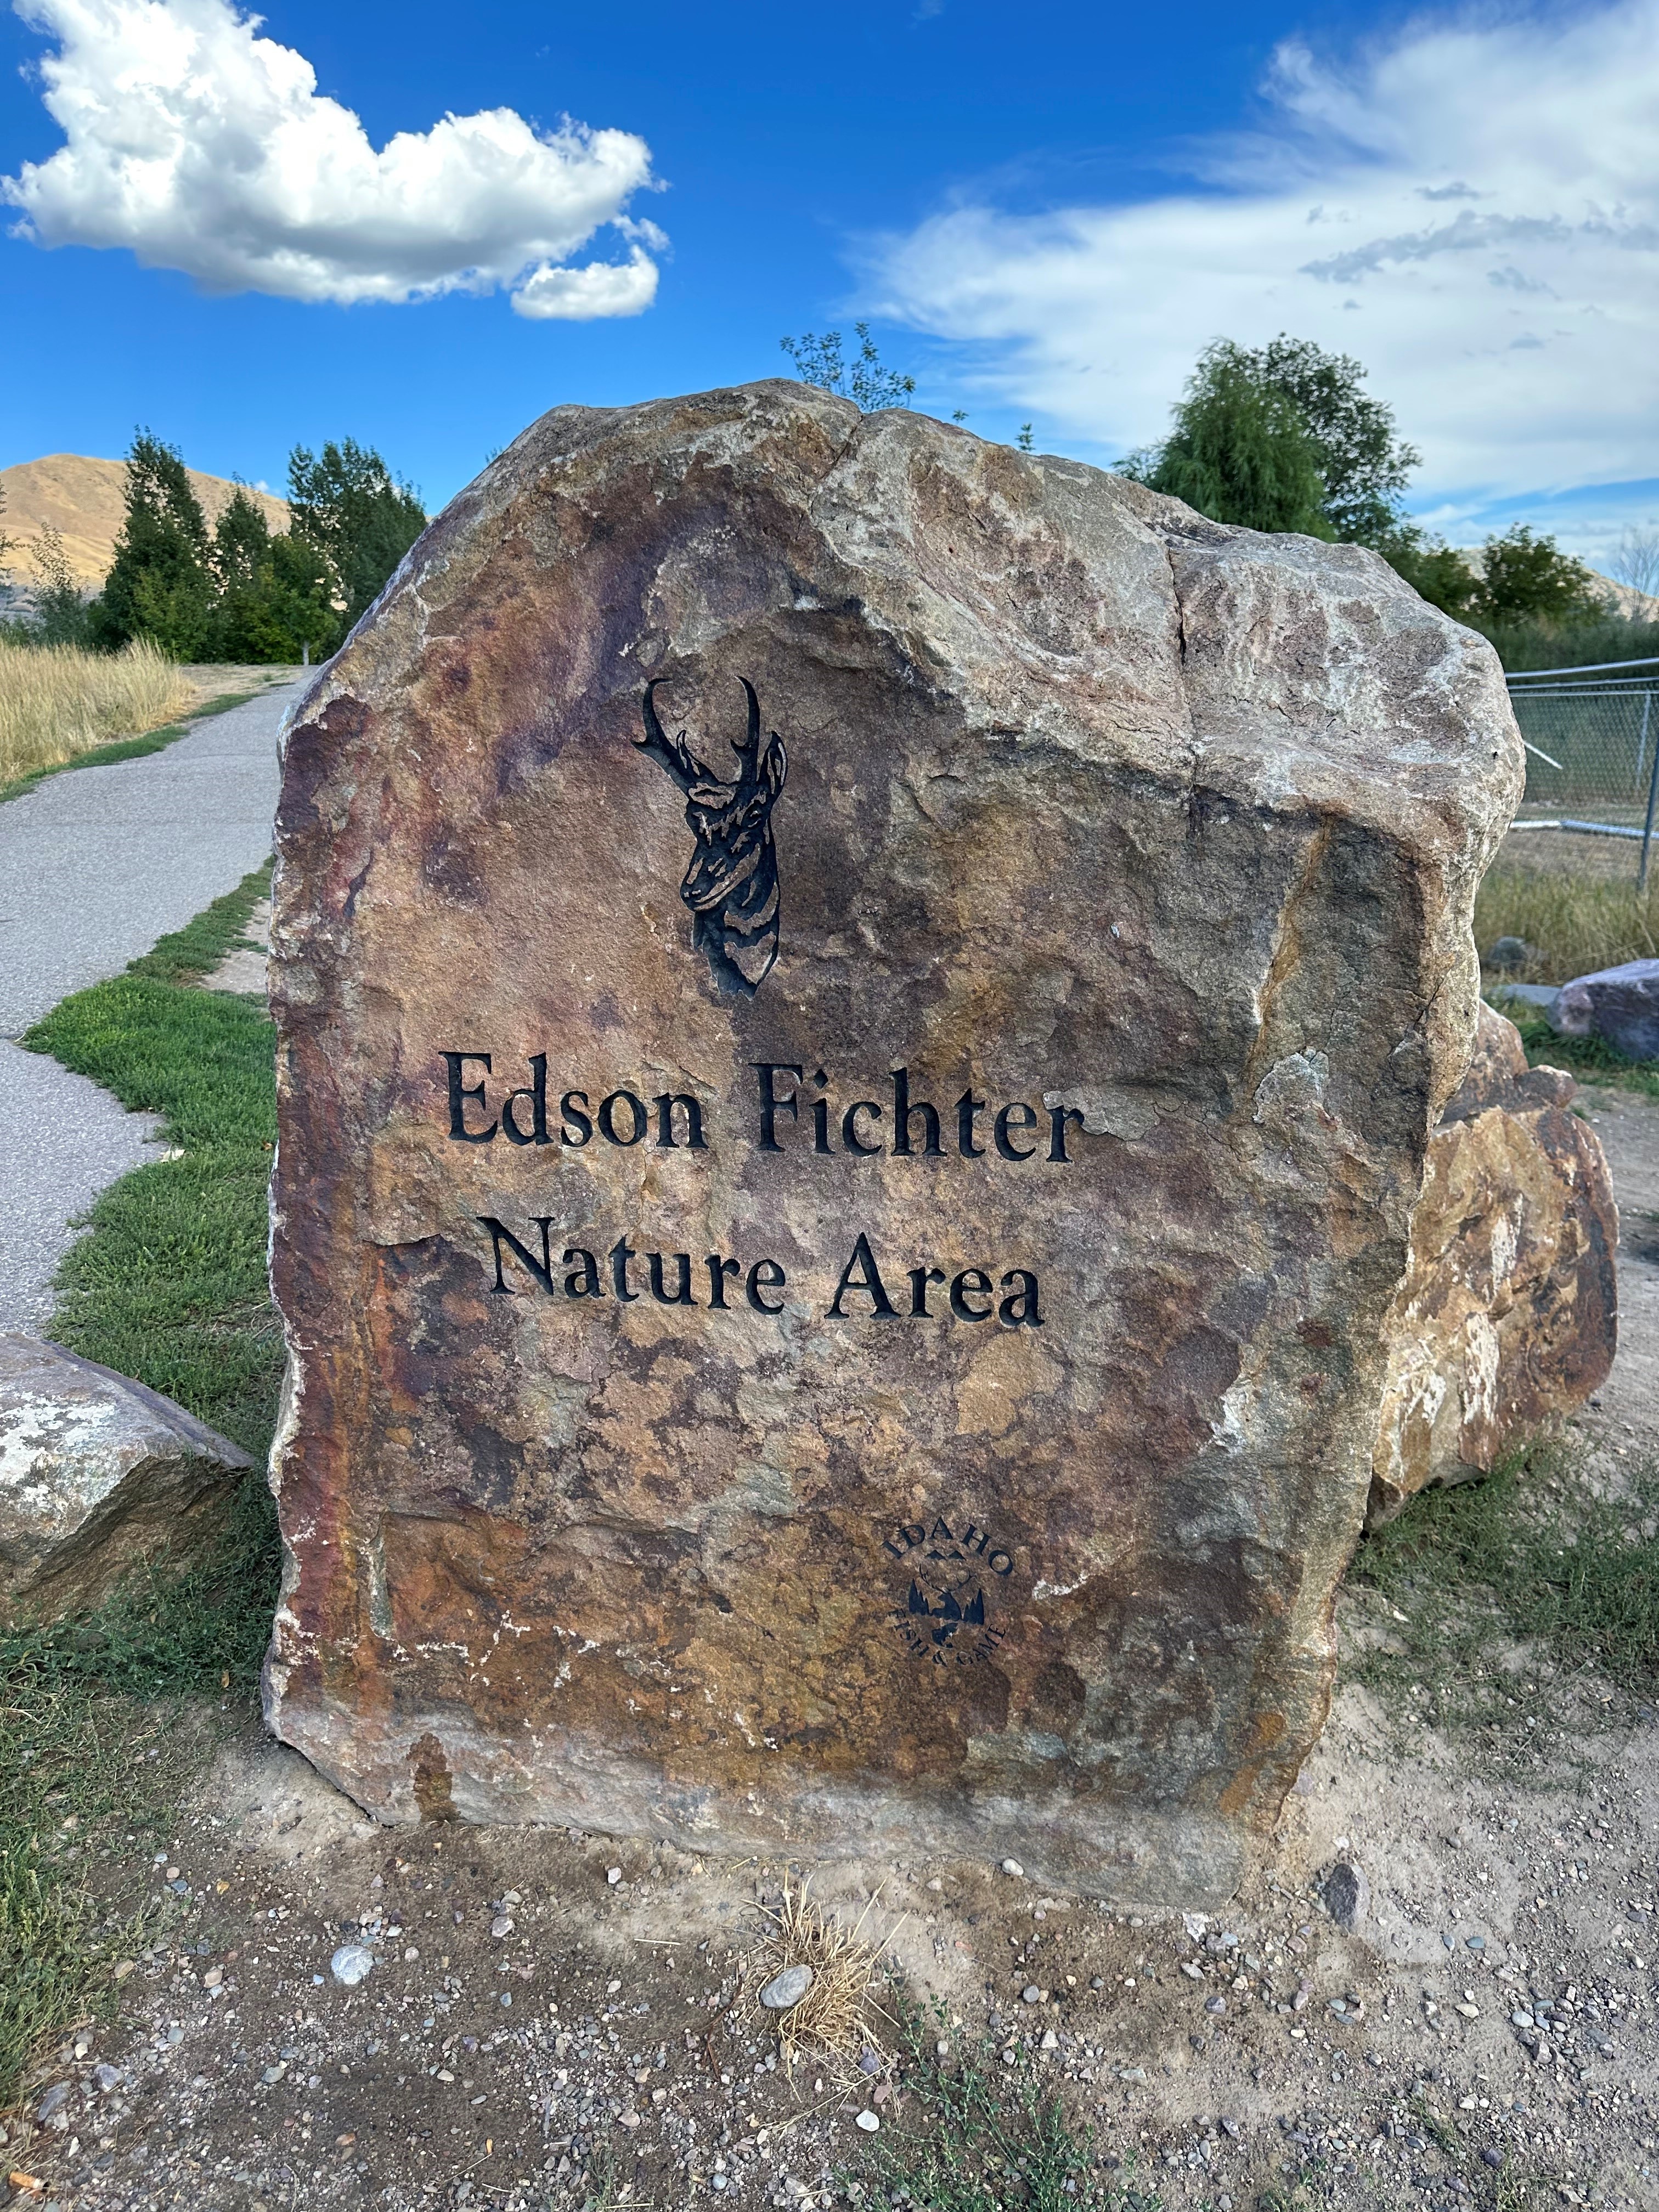 A large natural boulder engraved with the words Edson Fichter Nature Area is positioned at the entrance and next to a paved path at the Edson Fichter Nature Area.